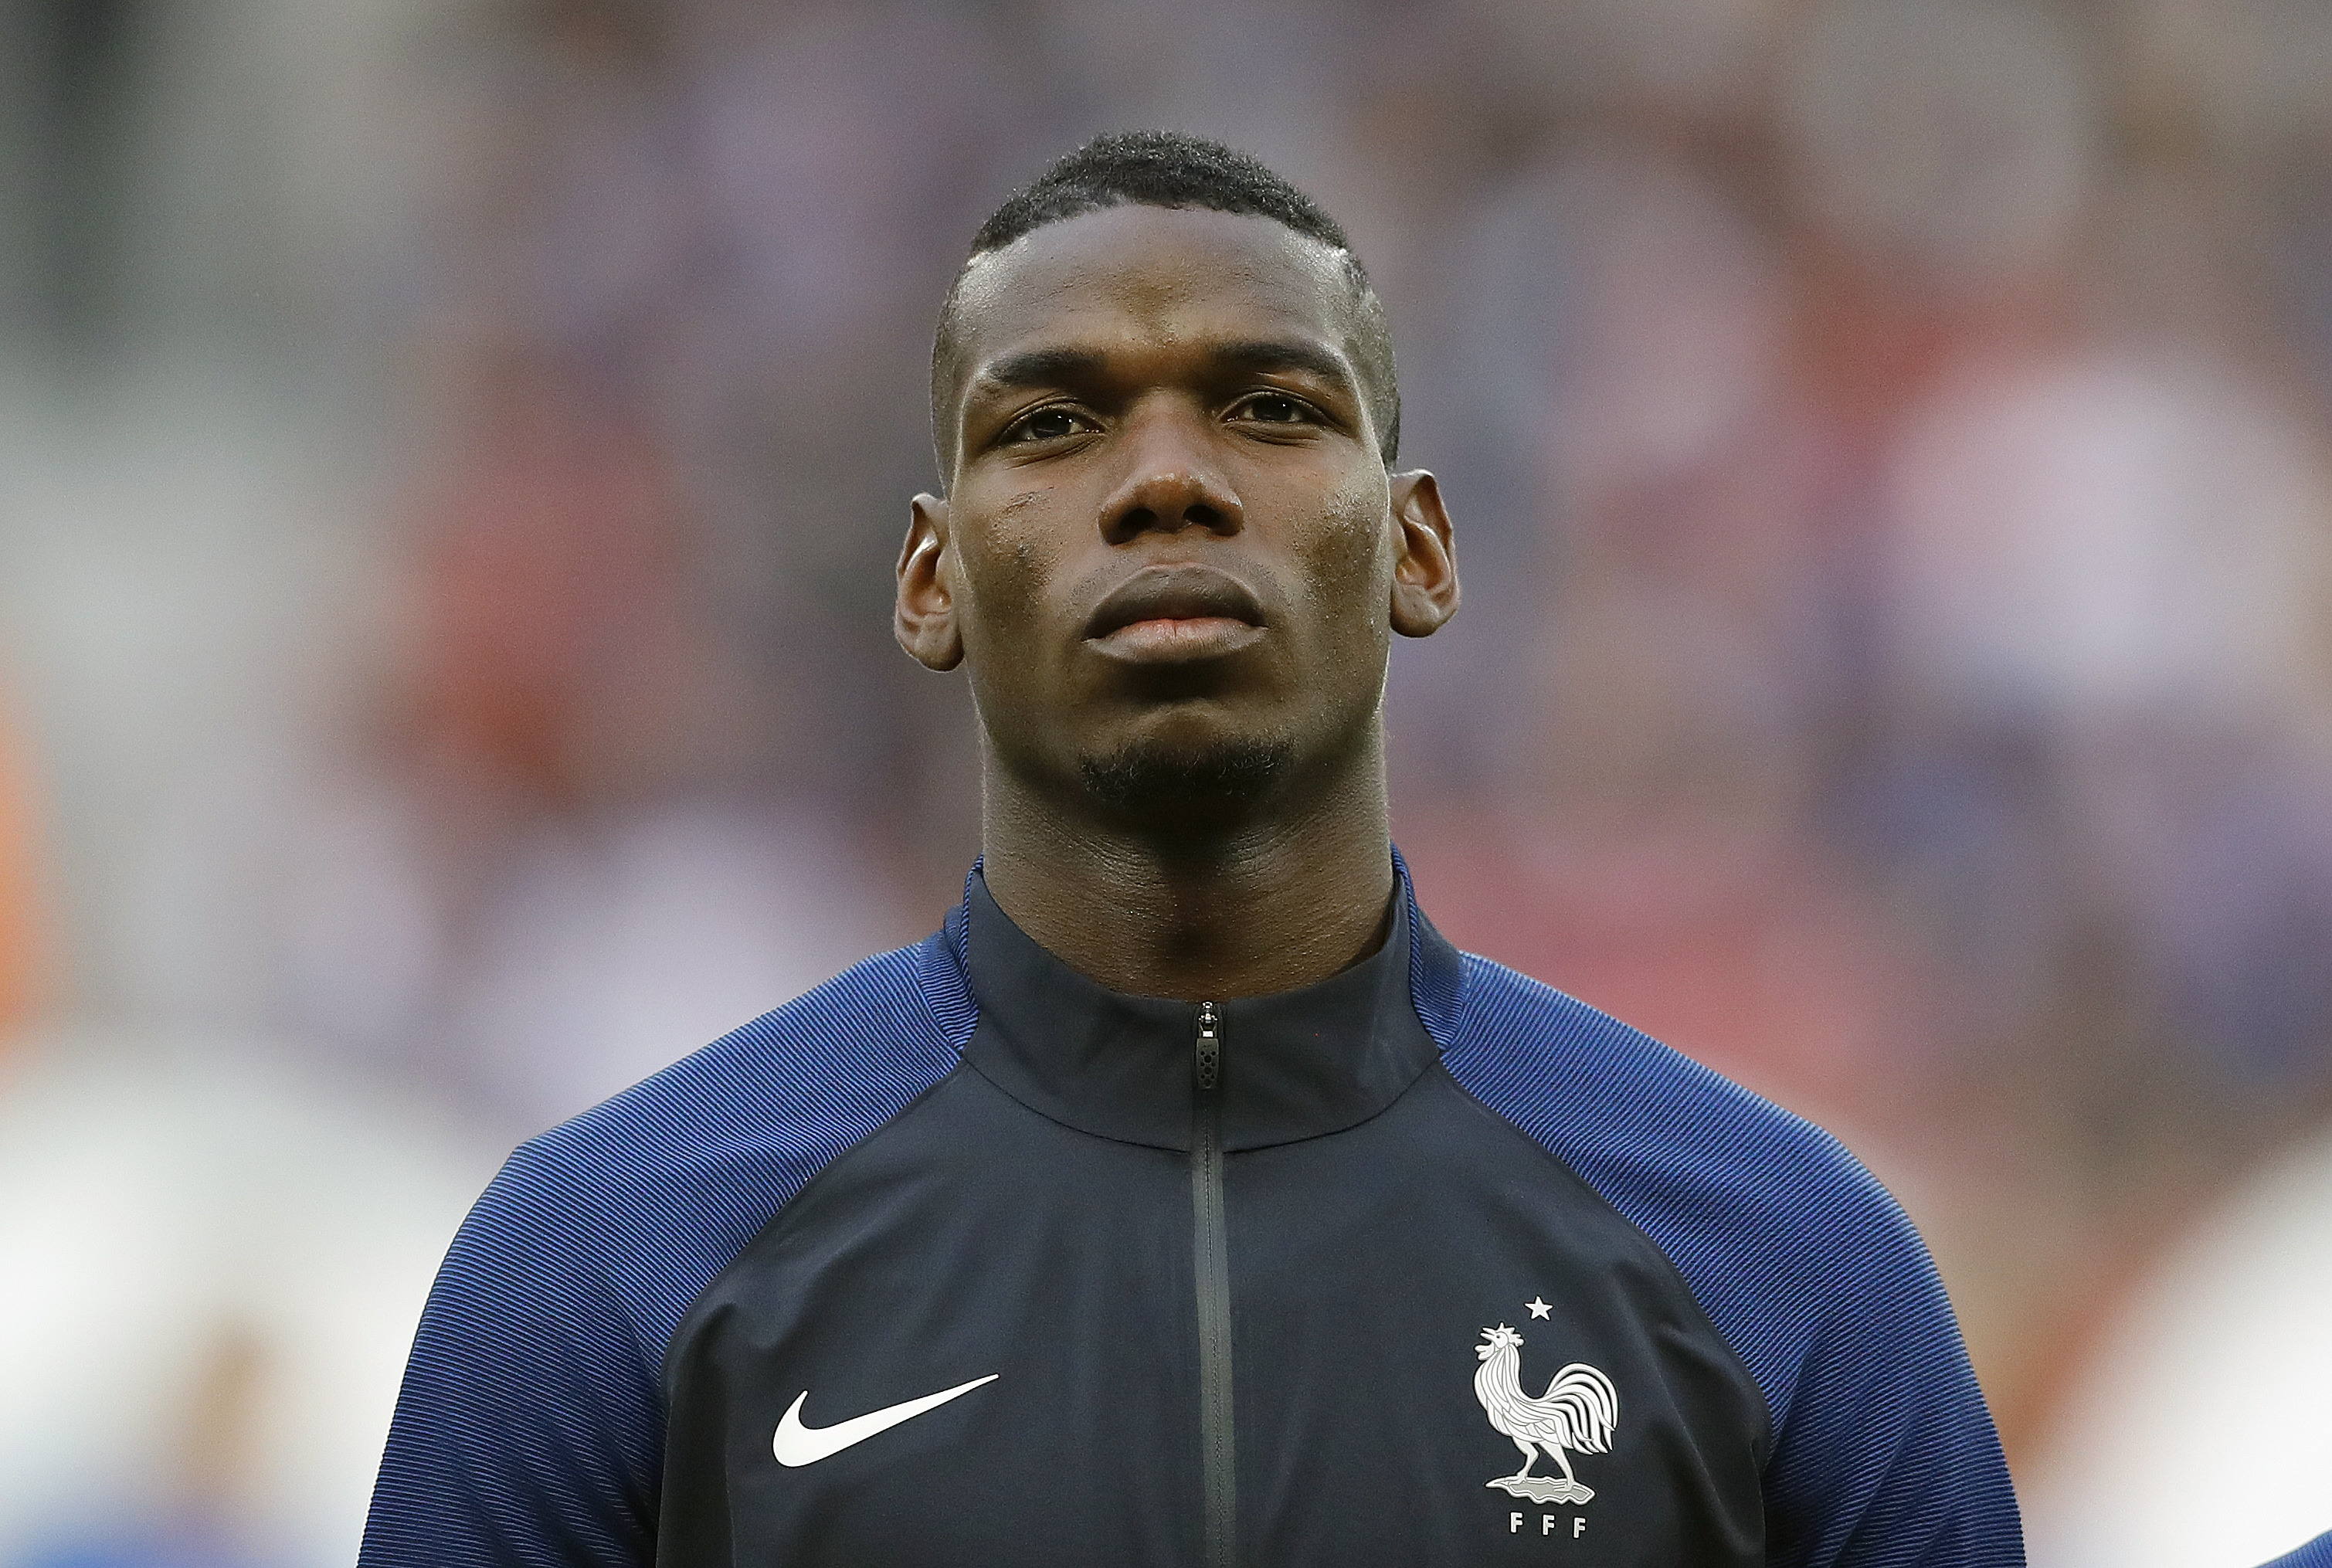 Pogba to conclude Manchester United deal after USA vacation | Football Transfer News